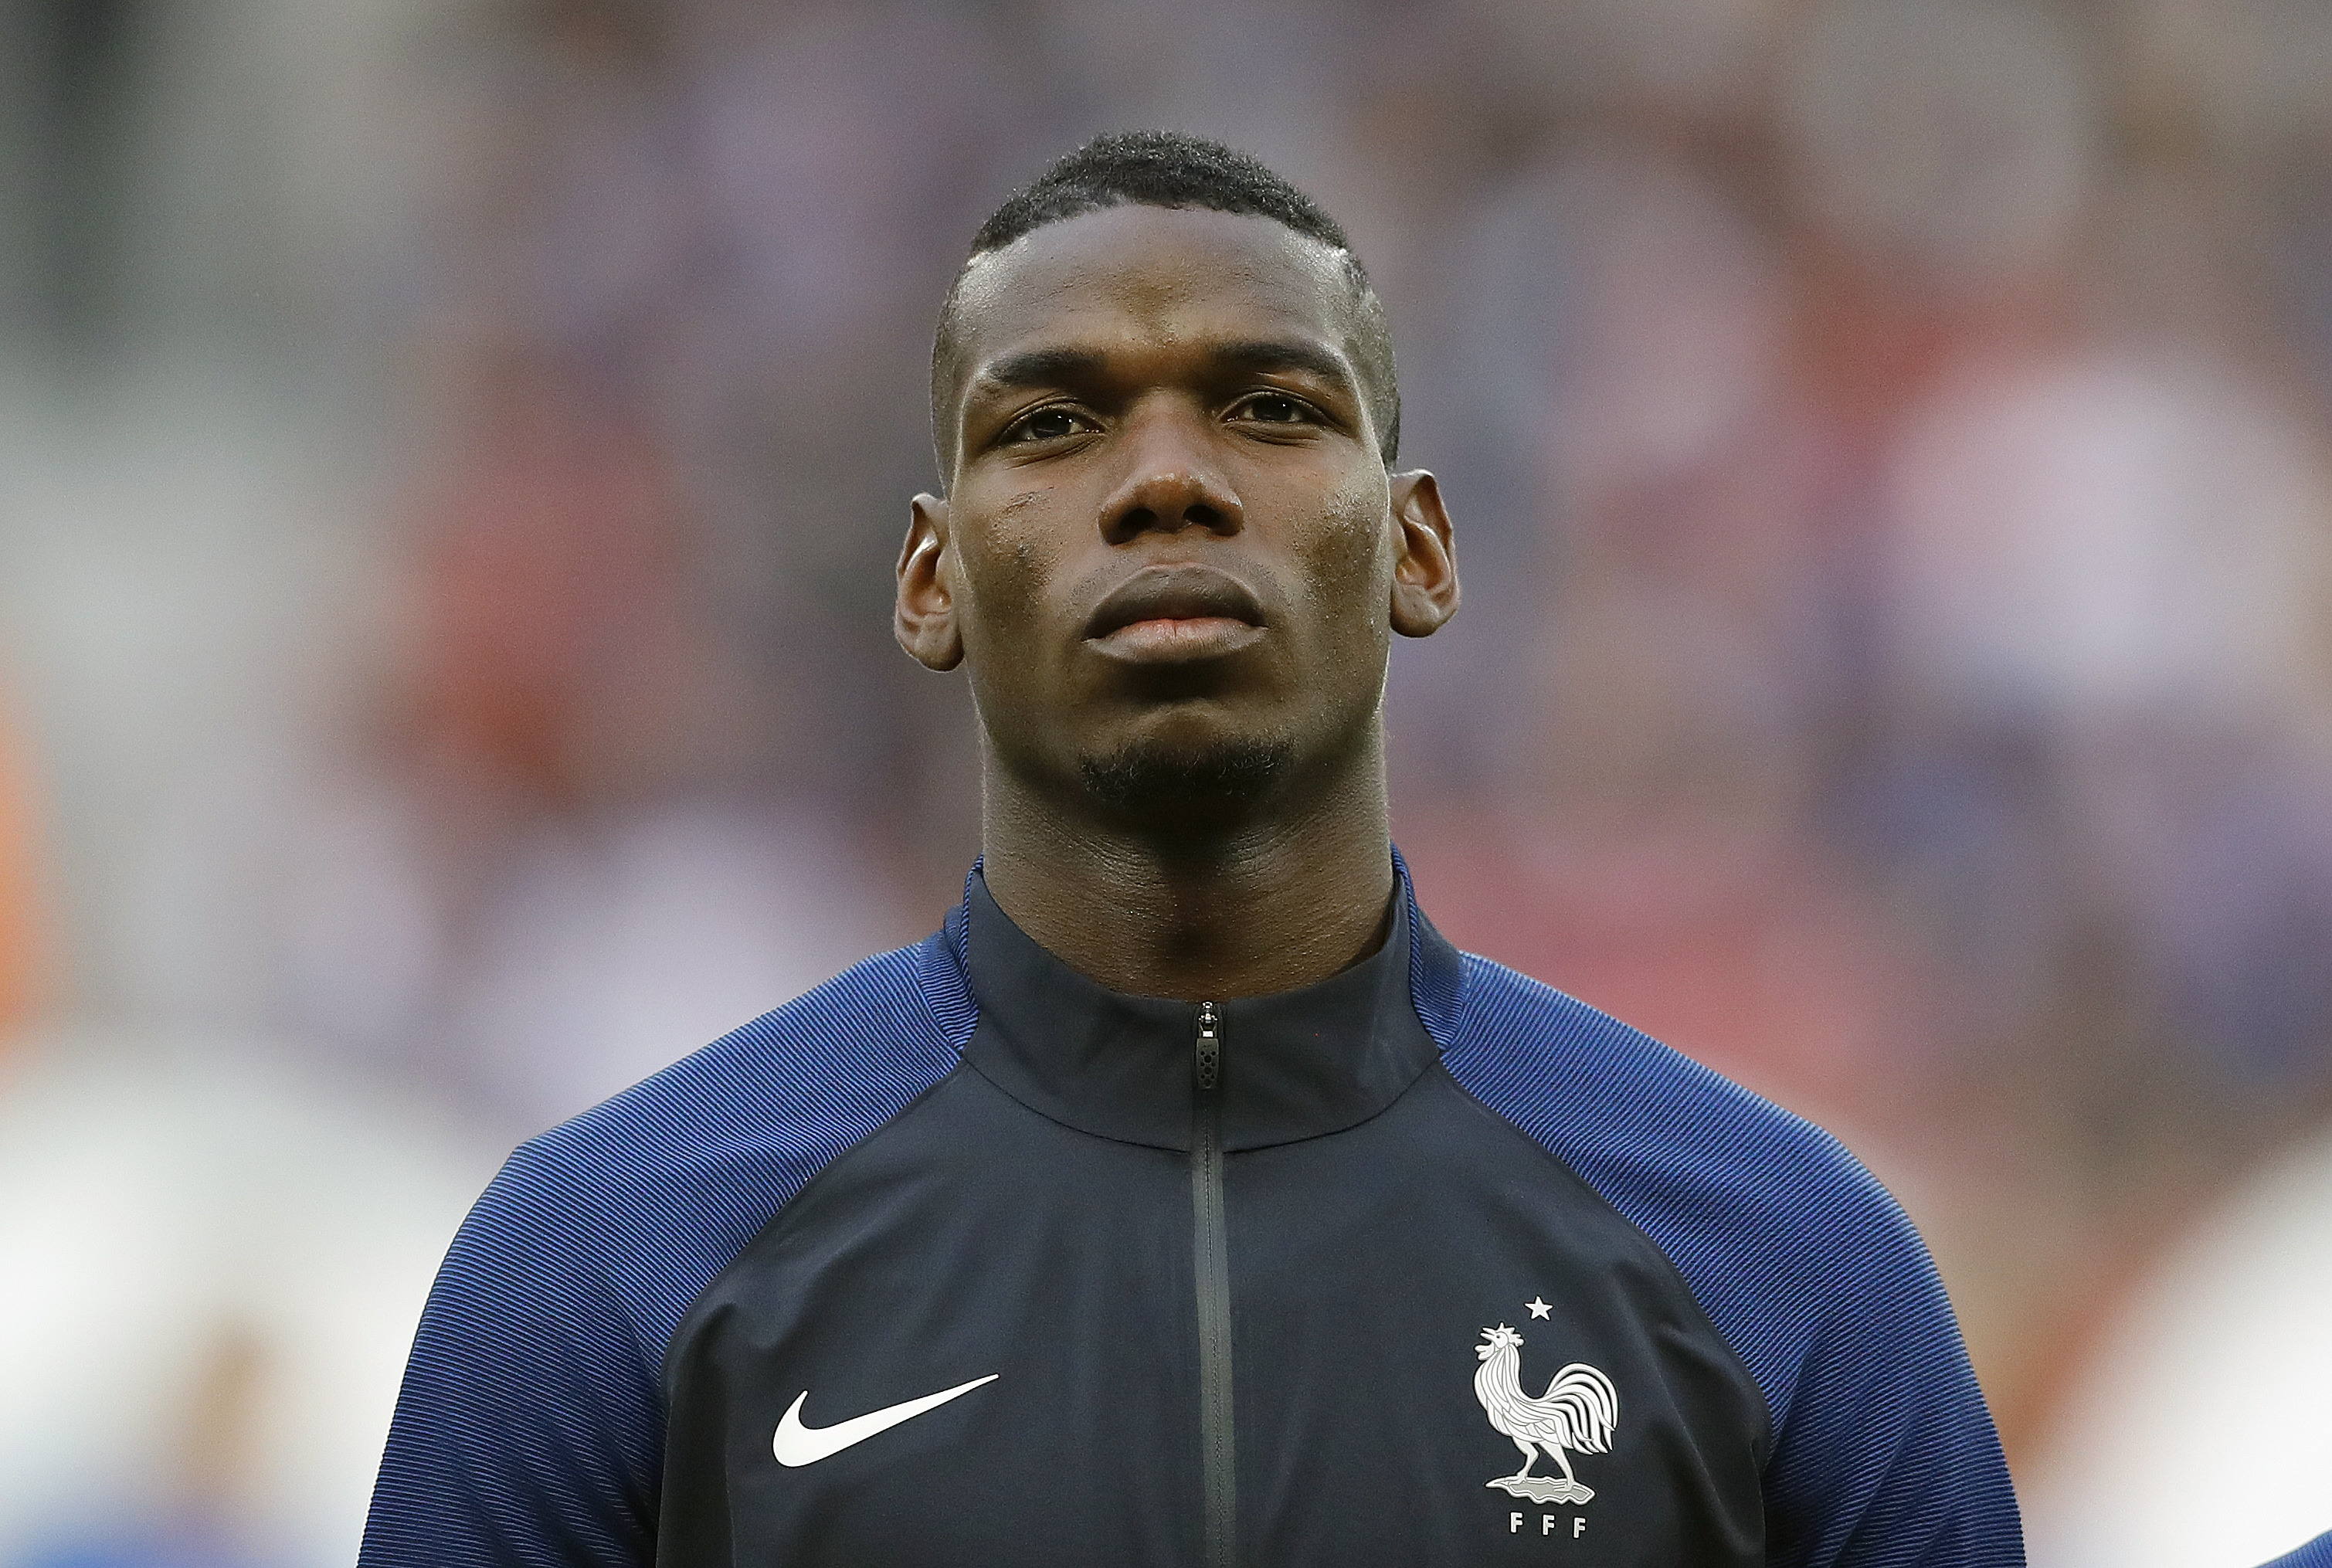 Pogba to conclude Manchester United deal after USA vacation | Football Transfer News